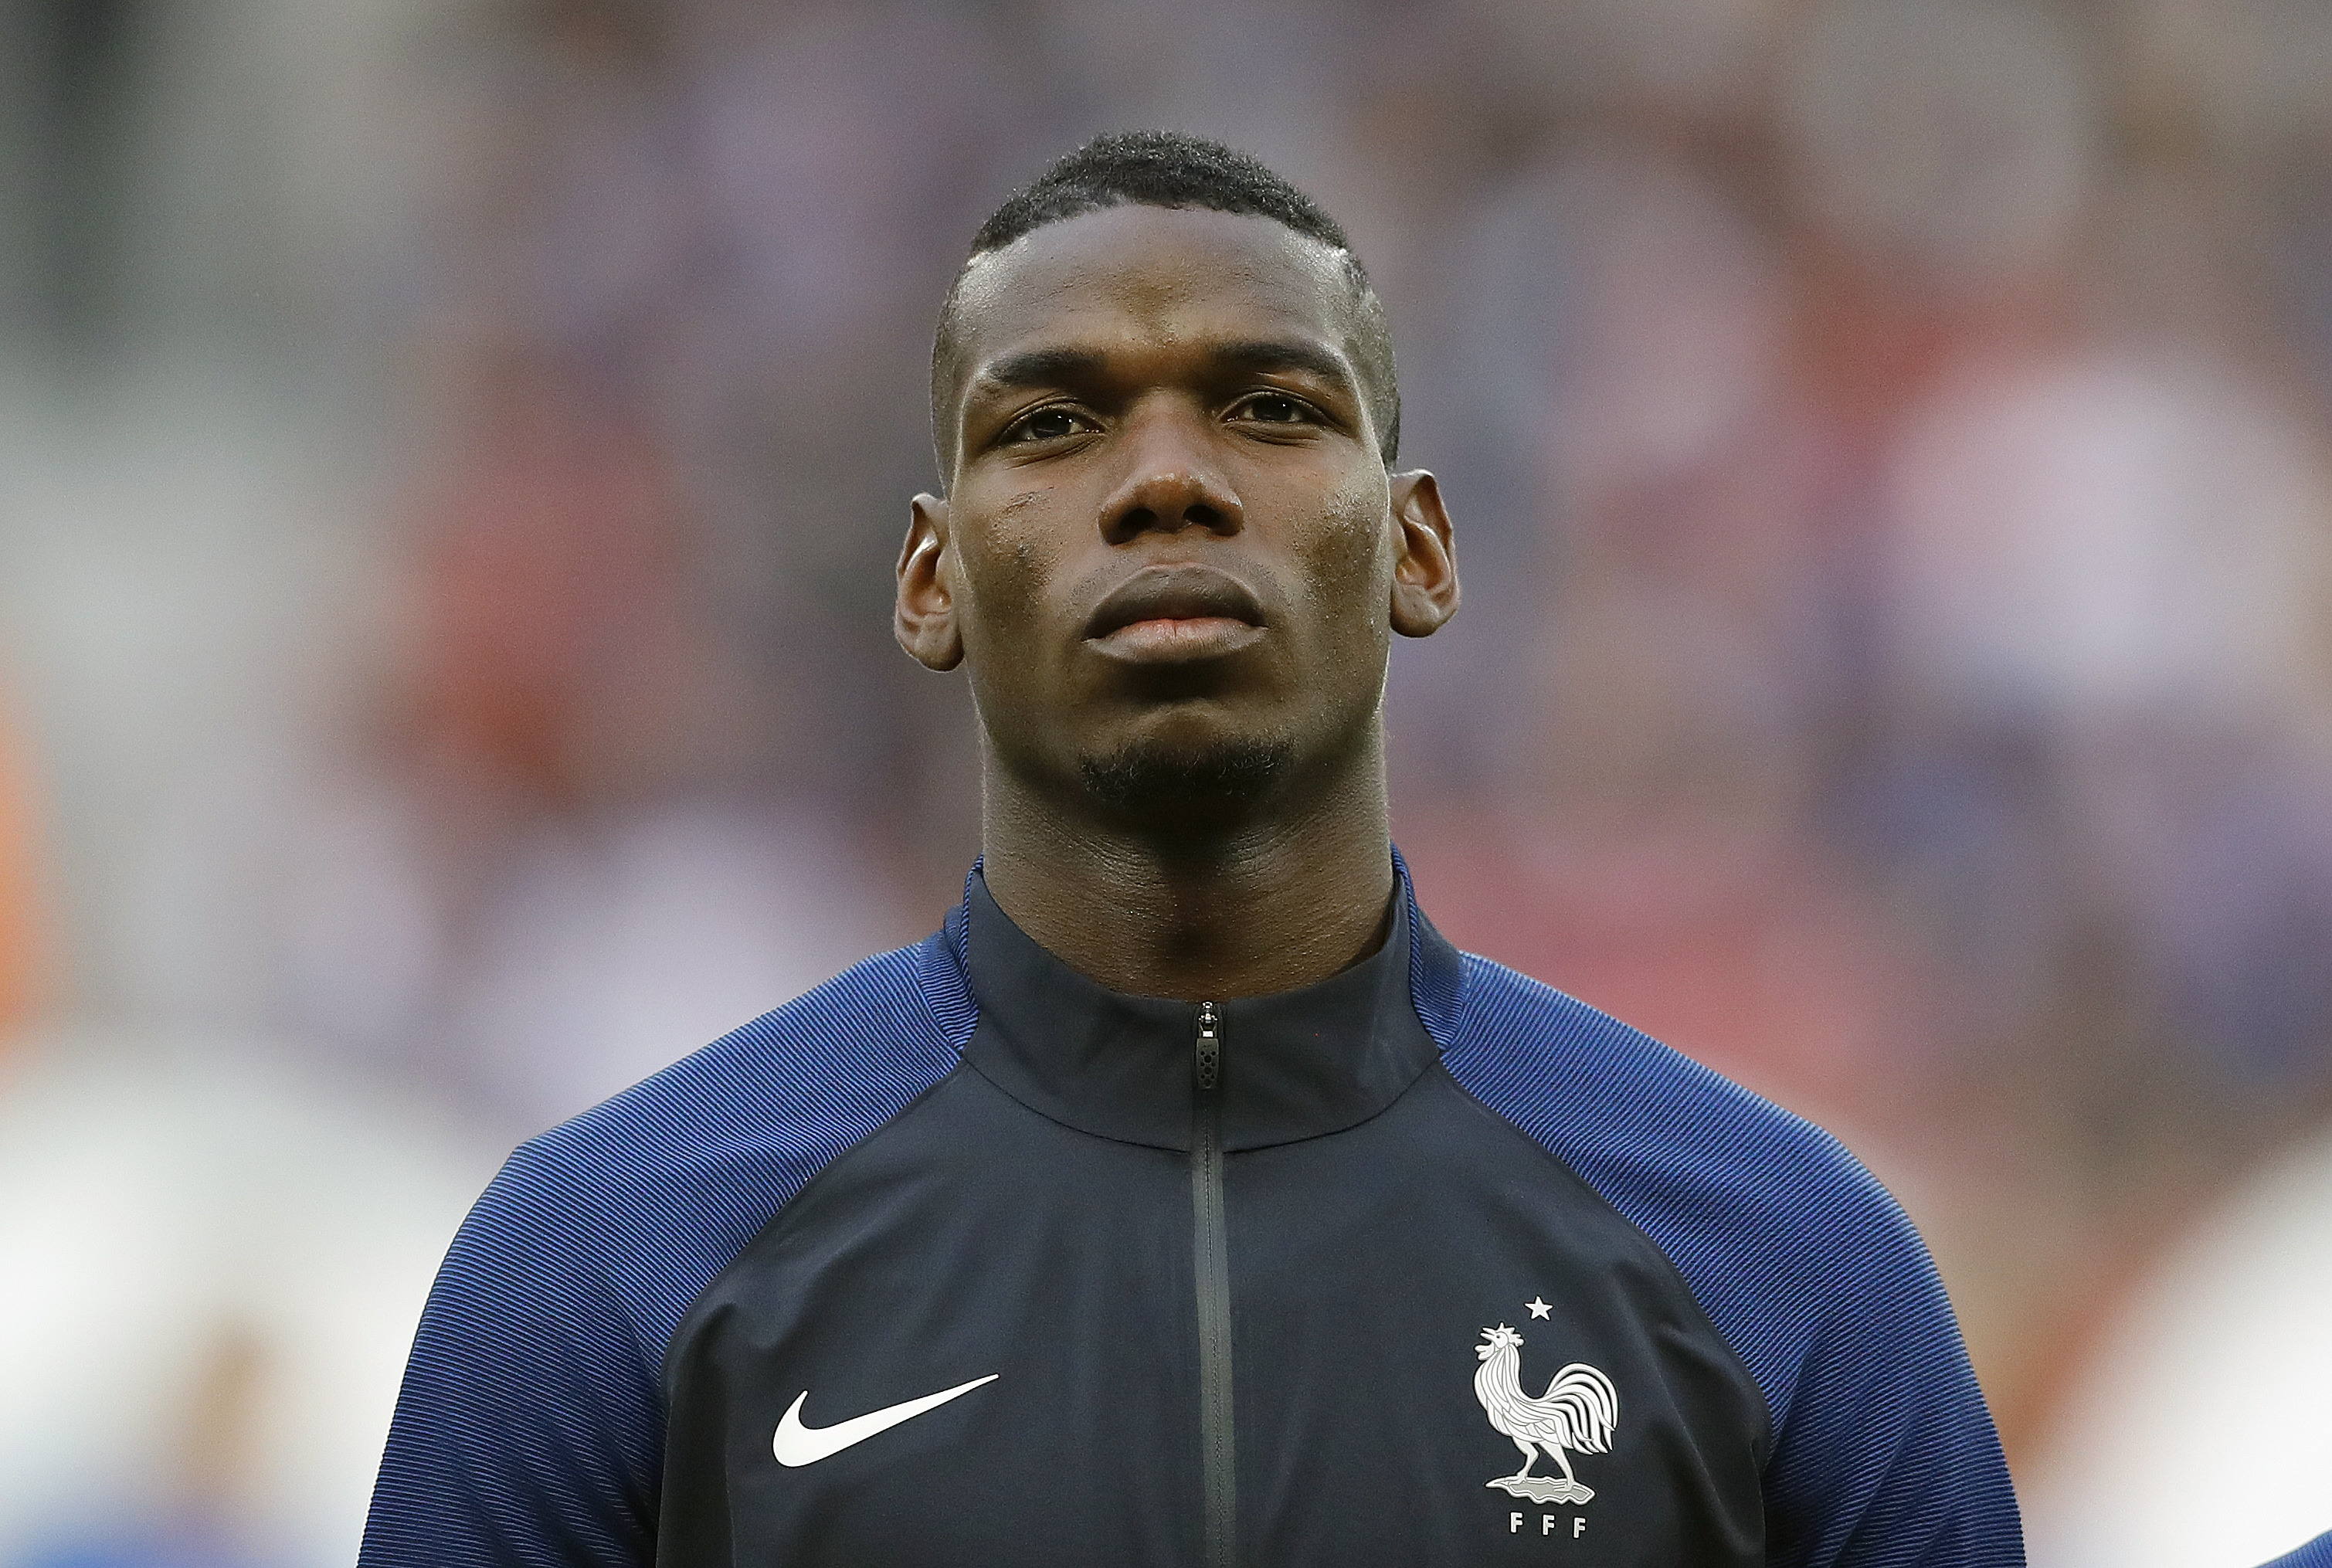 Pogba to conclude Manchester United deal after USA vacation | Football Transfer News